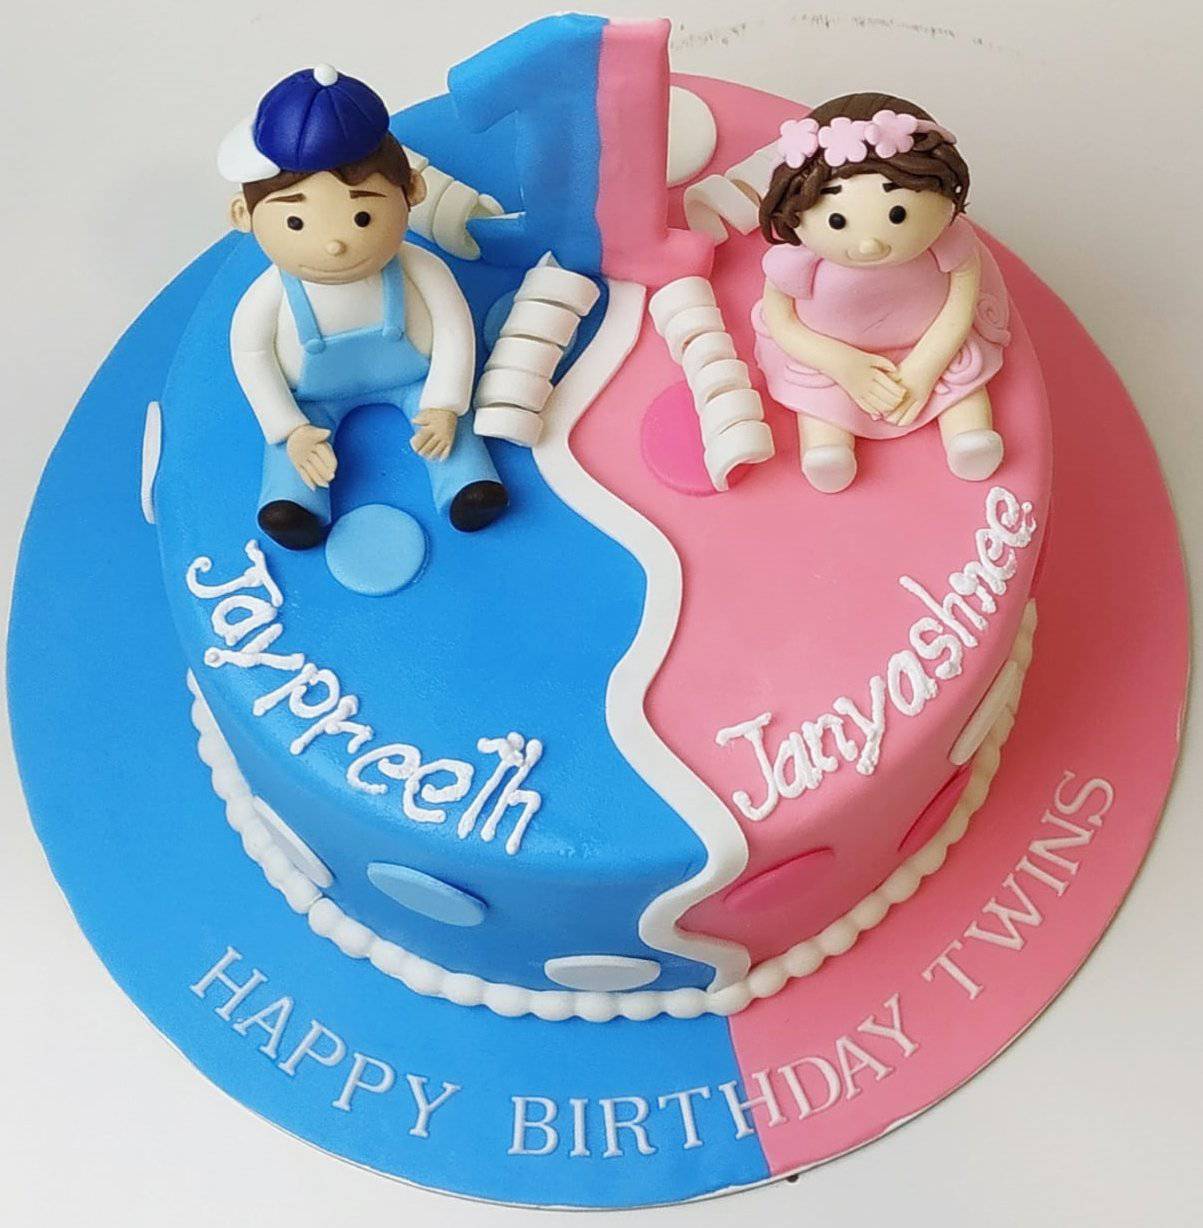 TWINS BABY BIRTHDAY CAKE ( with cup cake) - HandyBuy.lk | Sri Lanka's  Fastest Growing E-Commerce Store.